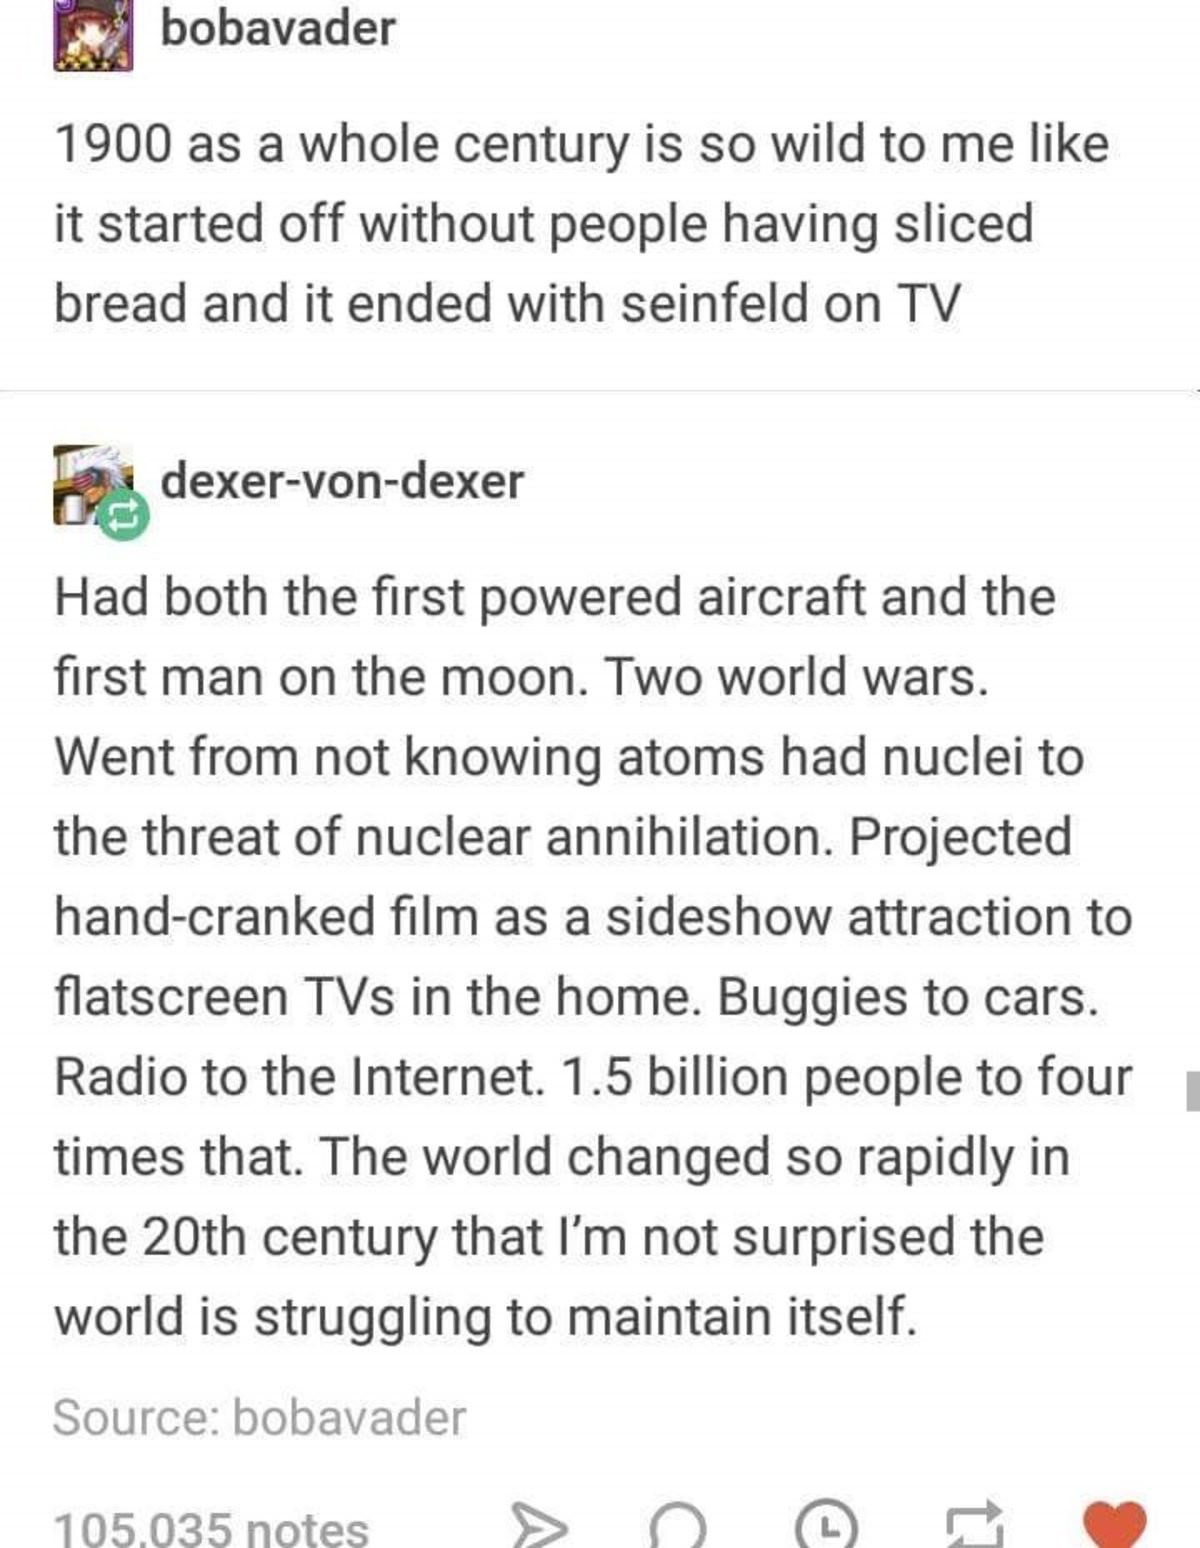 funny tumblr history - bobavader 1900 as a whole century is so wild to me it started off without people having sliced bread and it ended with seinfeld on Tv dexervondexer Had both the first powered aircraft and the first man on the moon. Two world wars. W